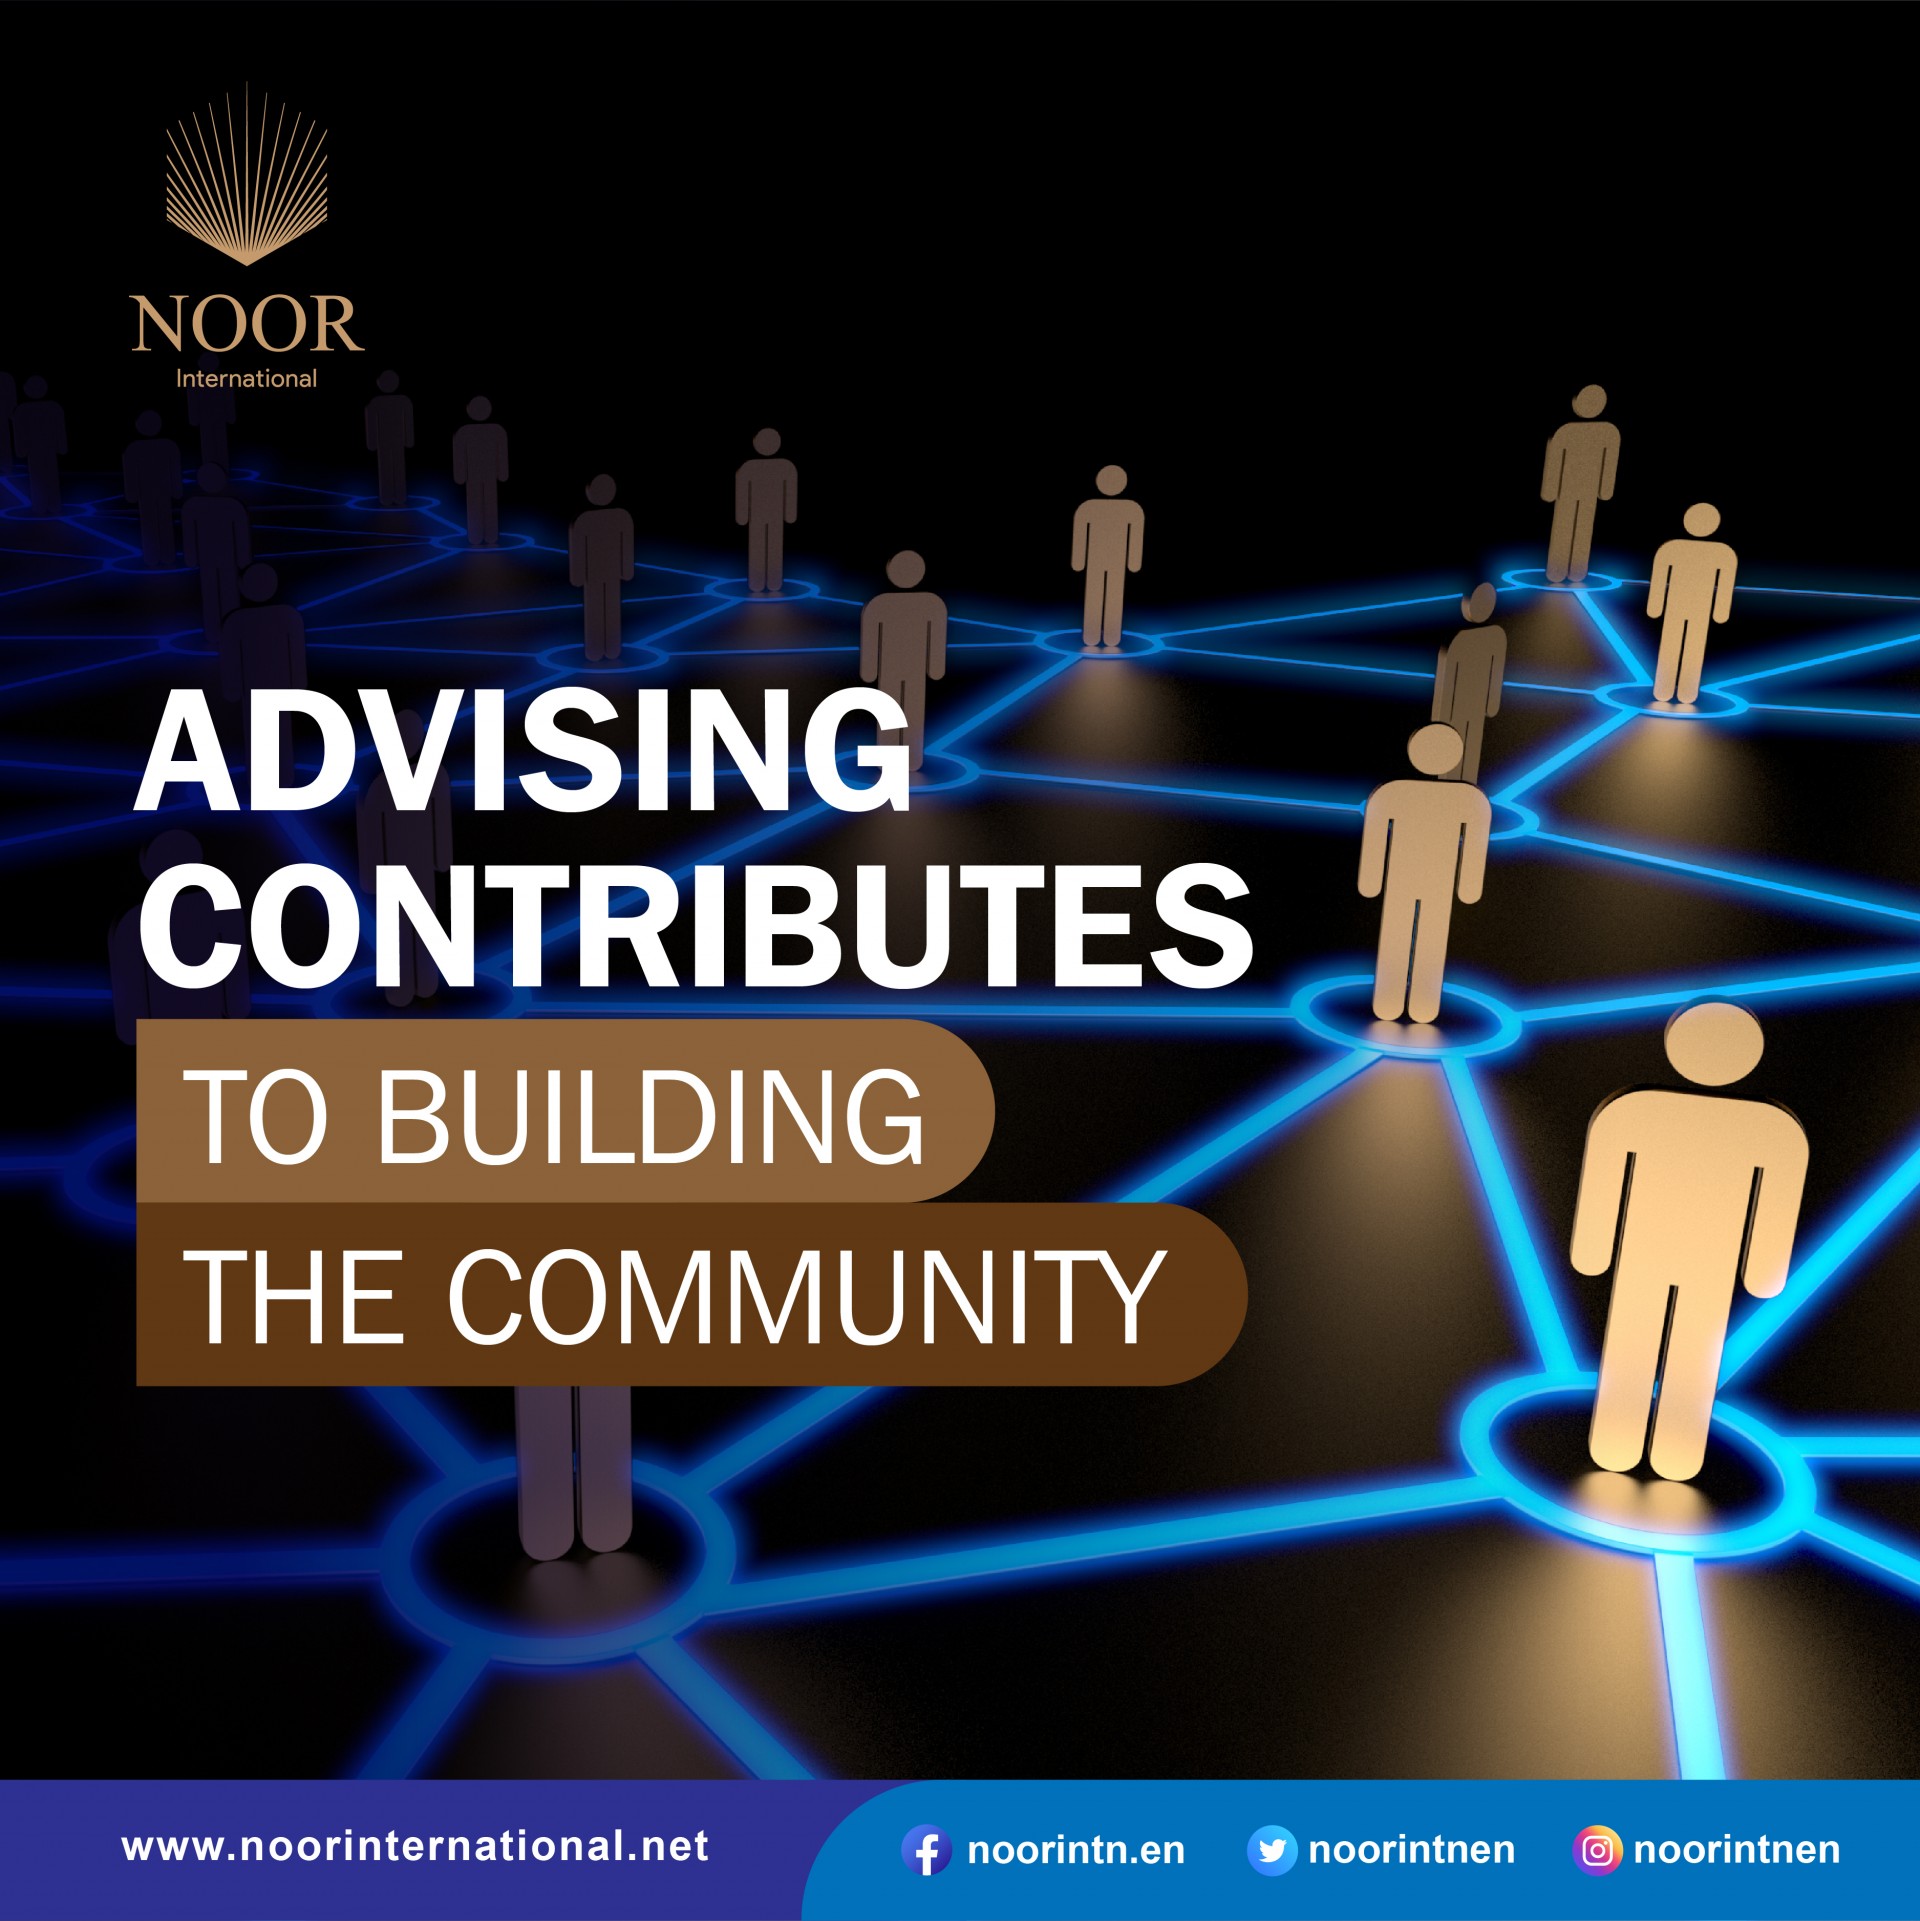 Advising contributes to building the community